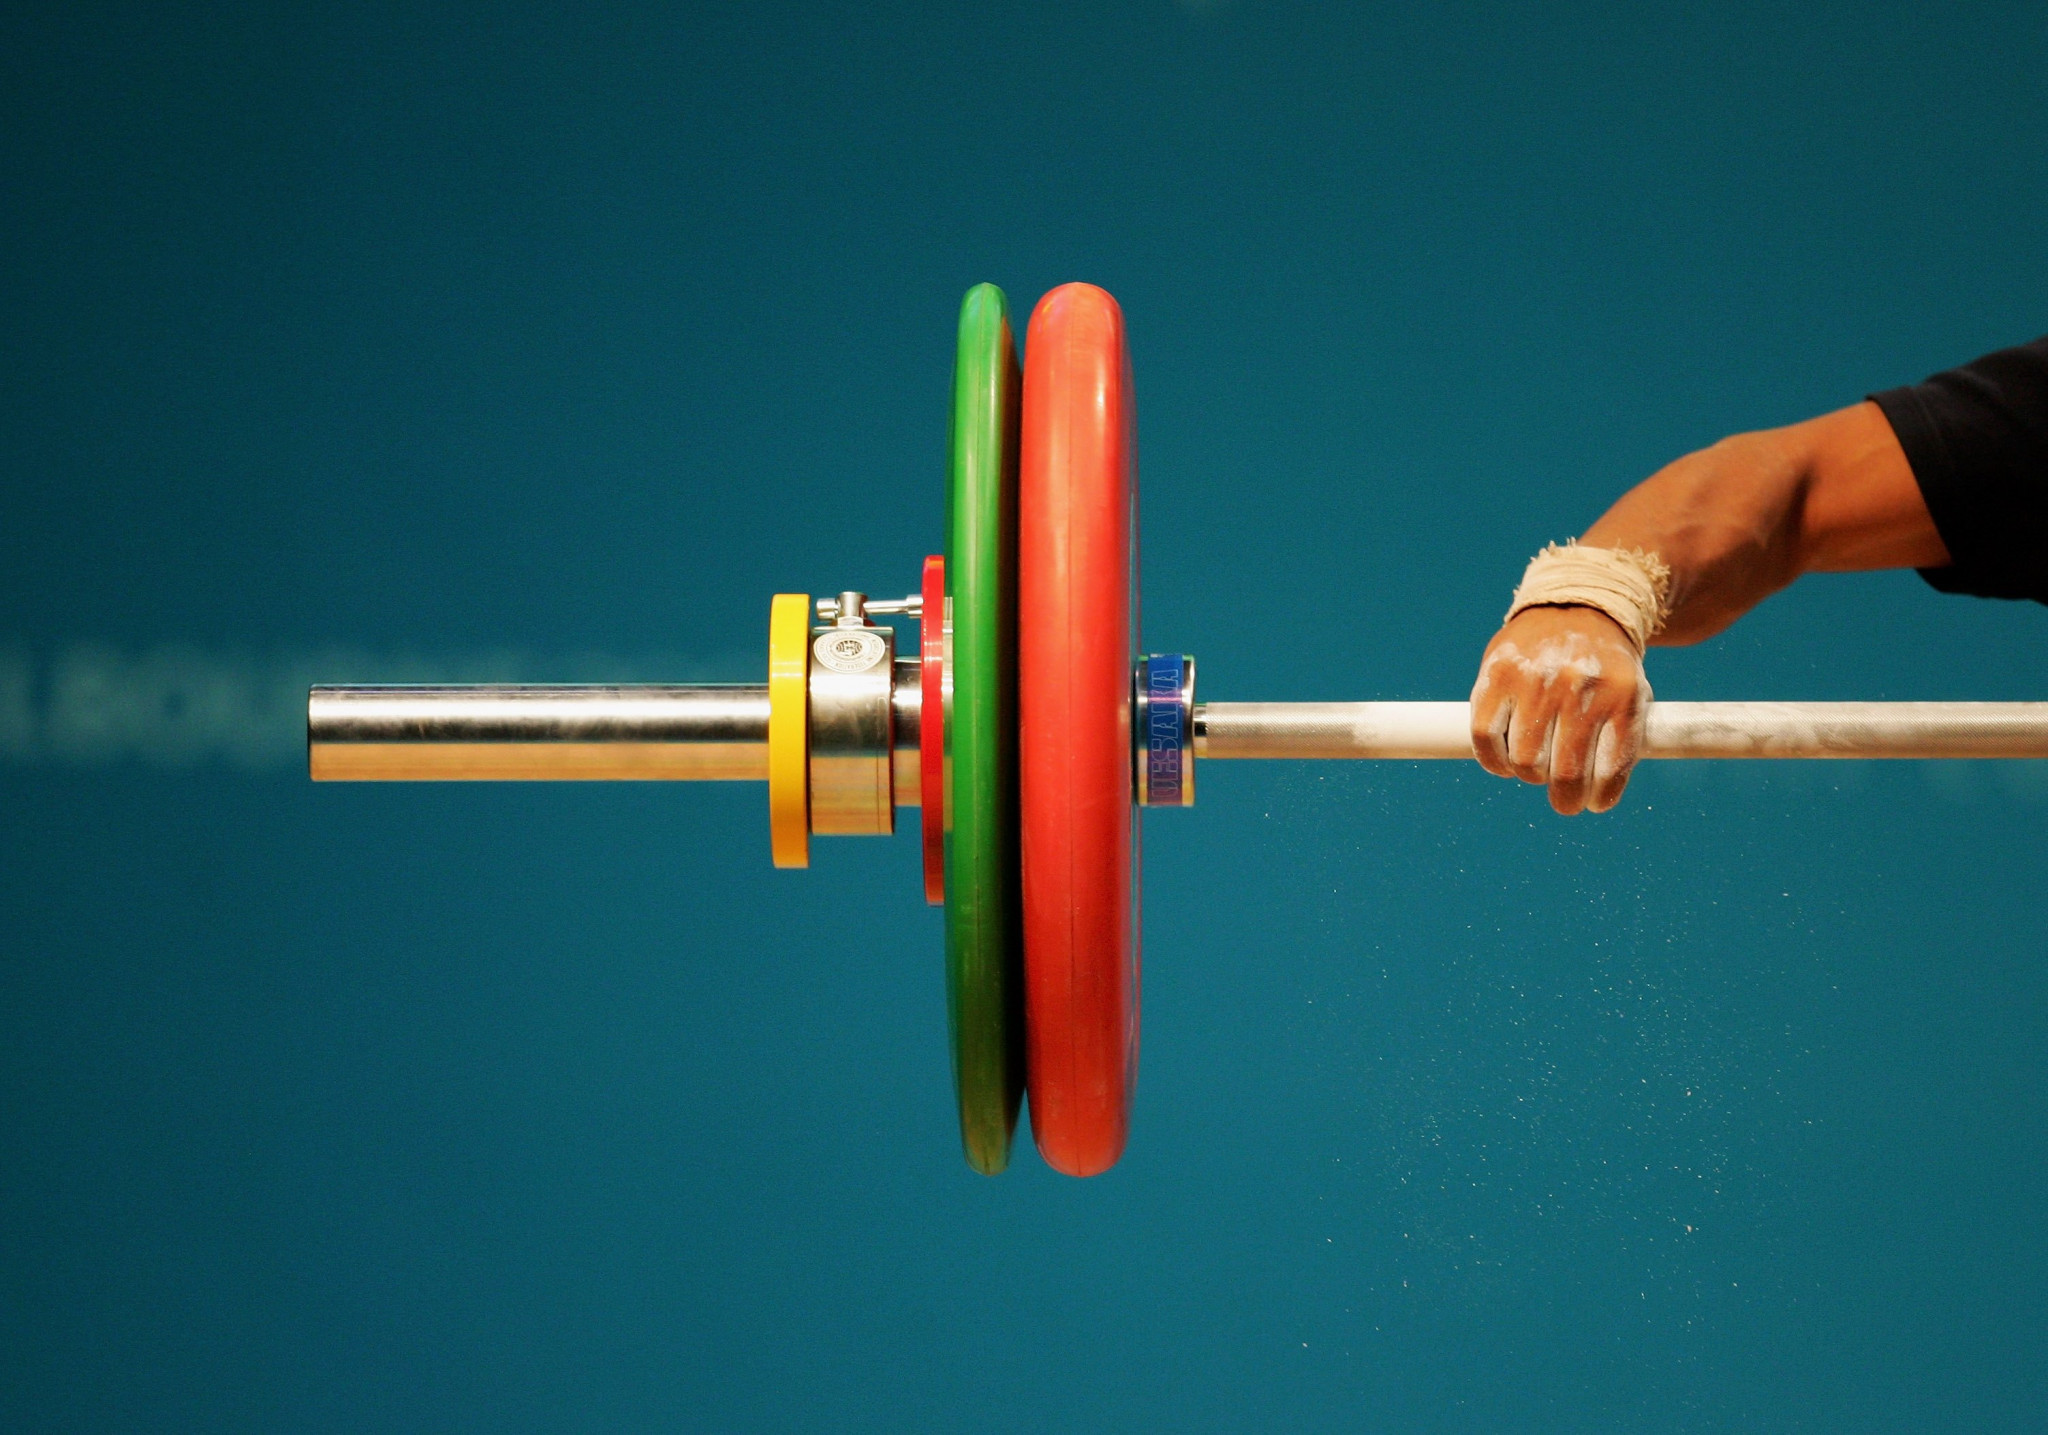 IWF member federations have been asked to submit nominations for the IWF Athletes Commission ©Getty Images